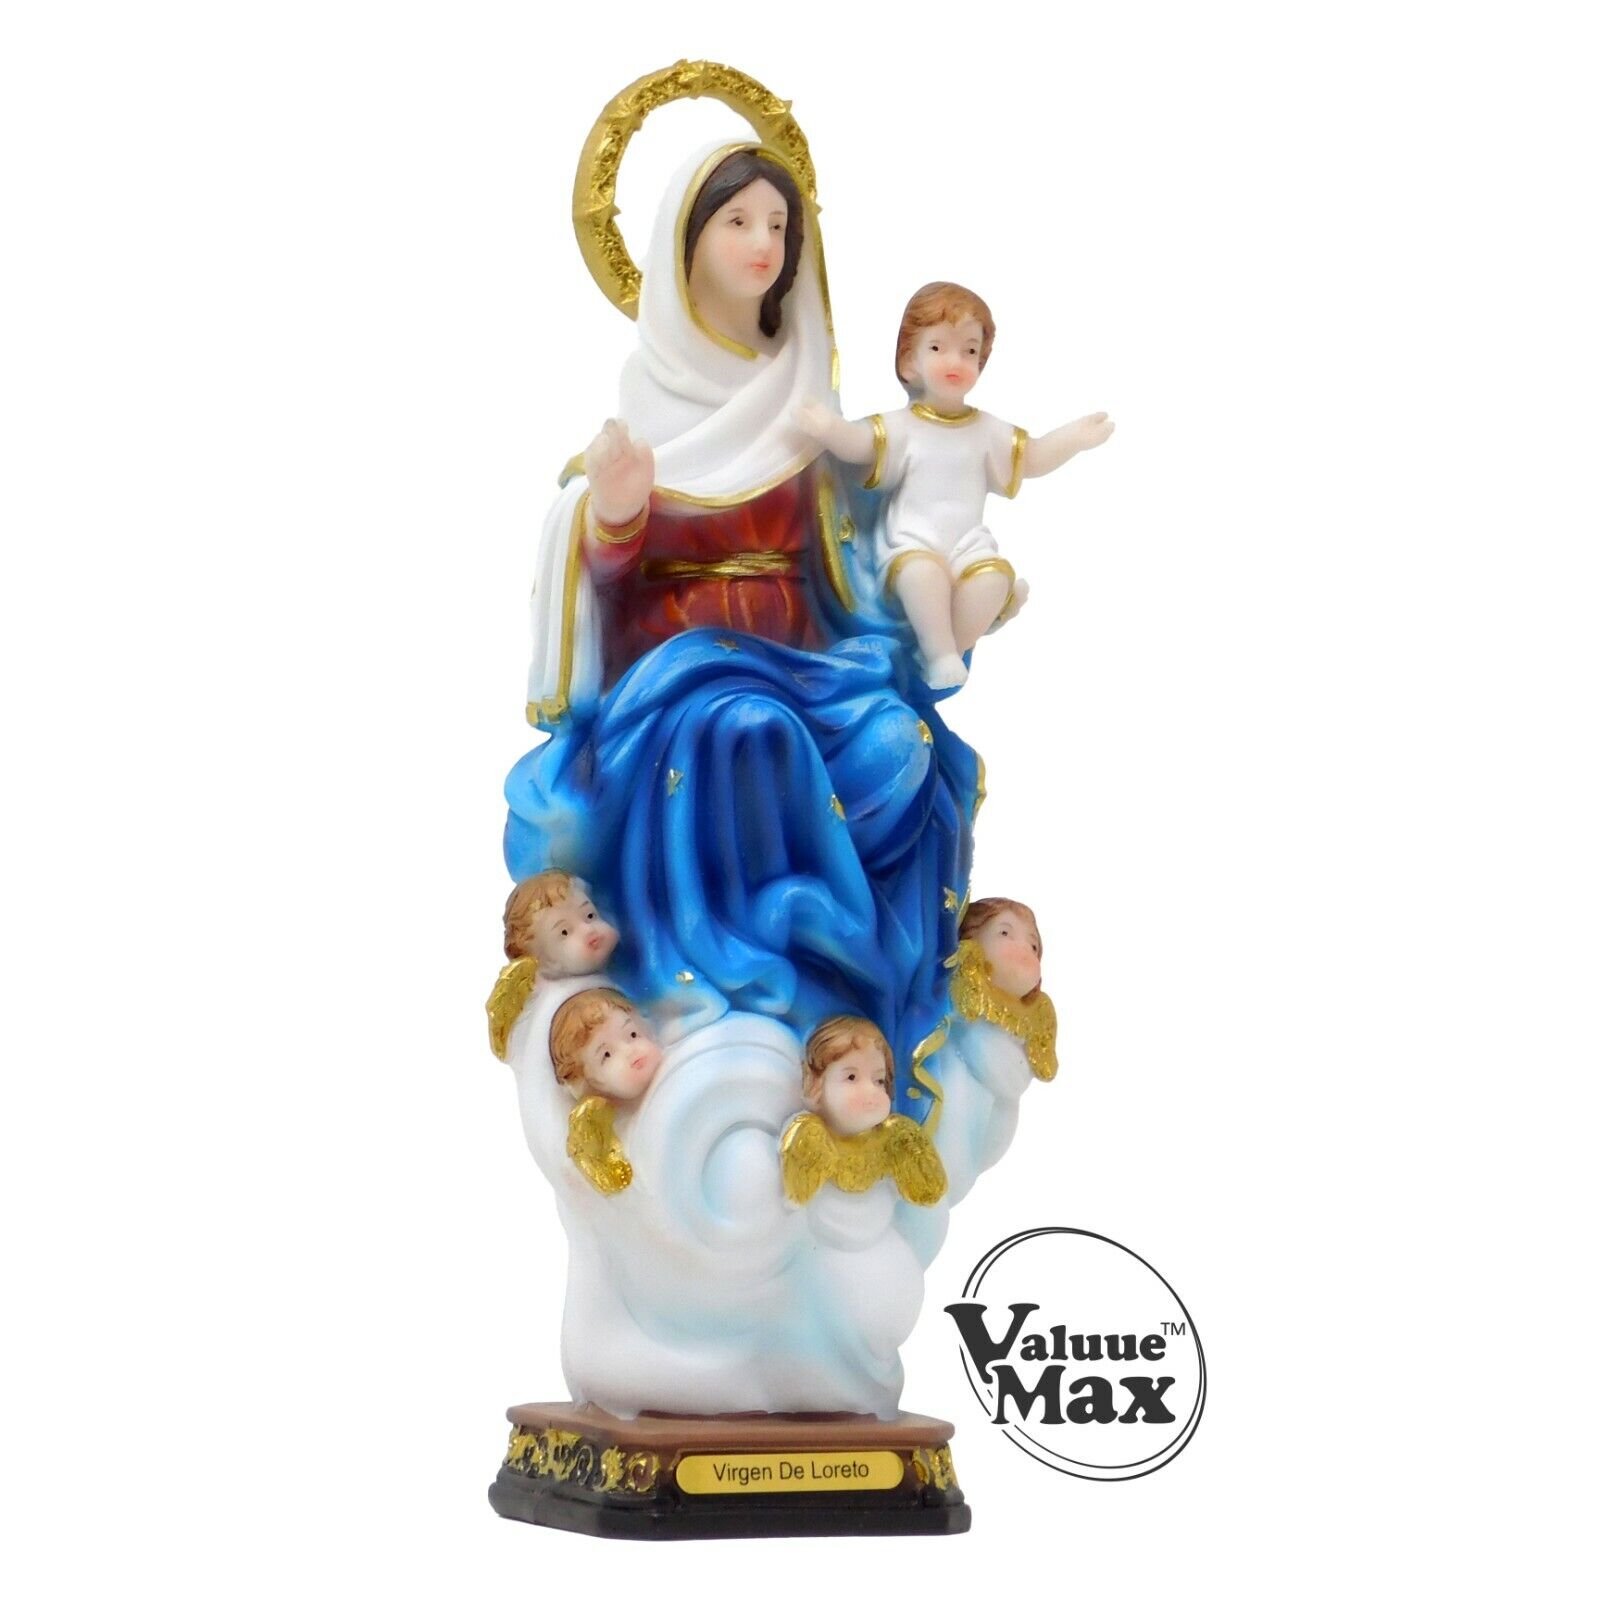 ValuueMax™ Our Lady of Loreto Statue, Finely Detailed Resin 8 Inch Tall Figurine